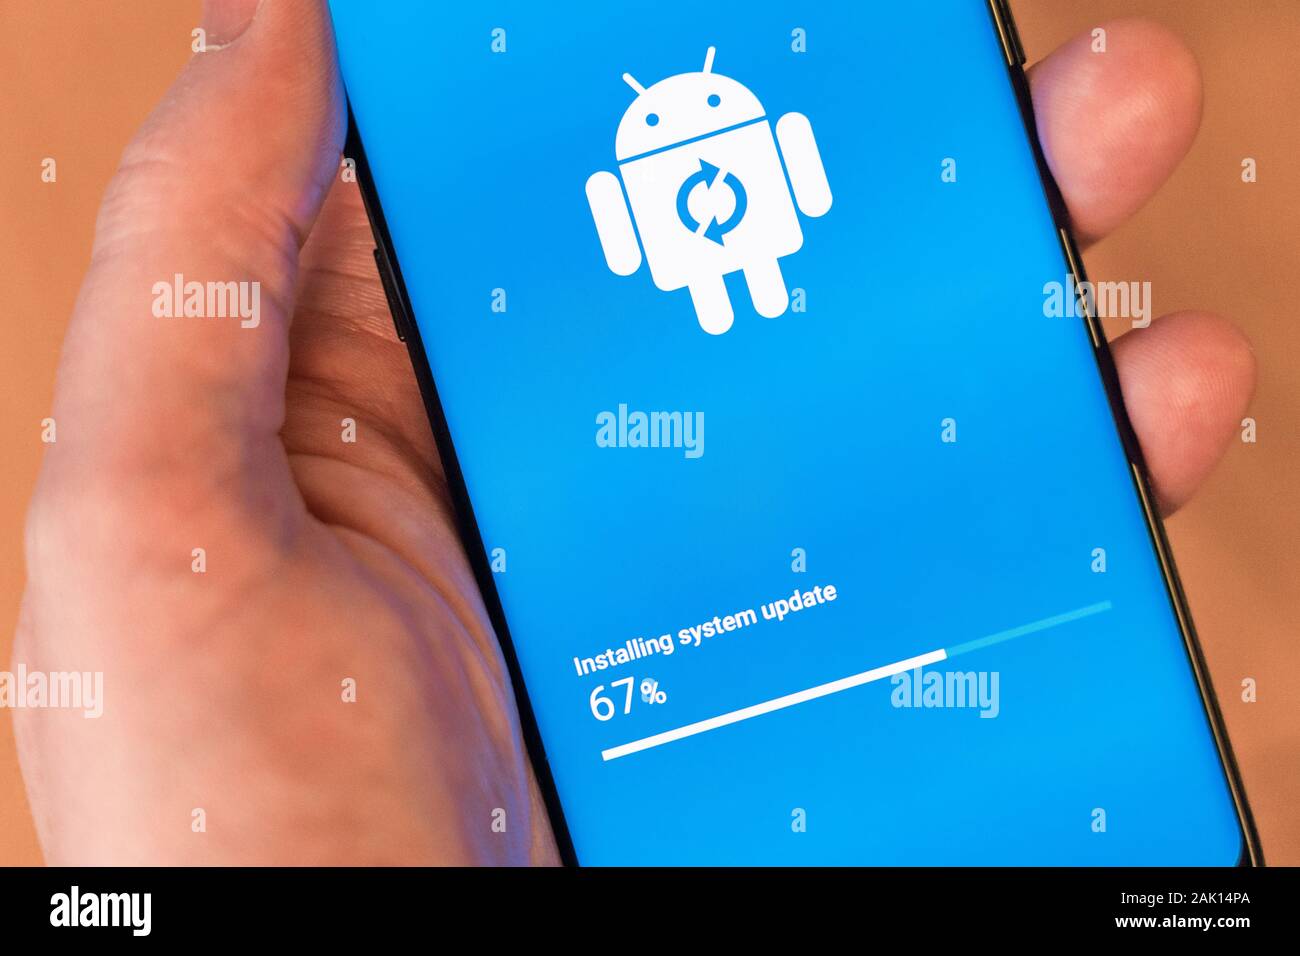 A man's hand holding a smartphone installing an Android system update, showing the Google Android mascot robot - Bugdroid Stock Photo